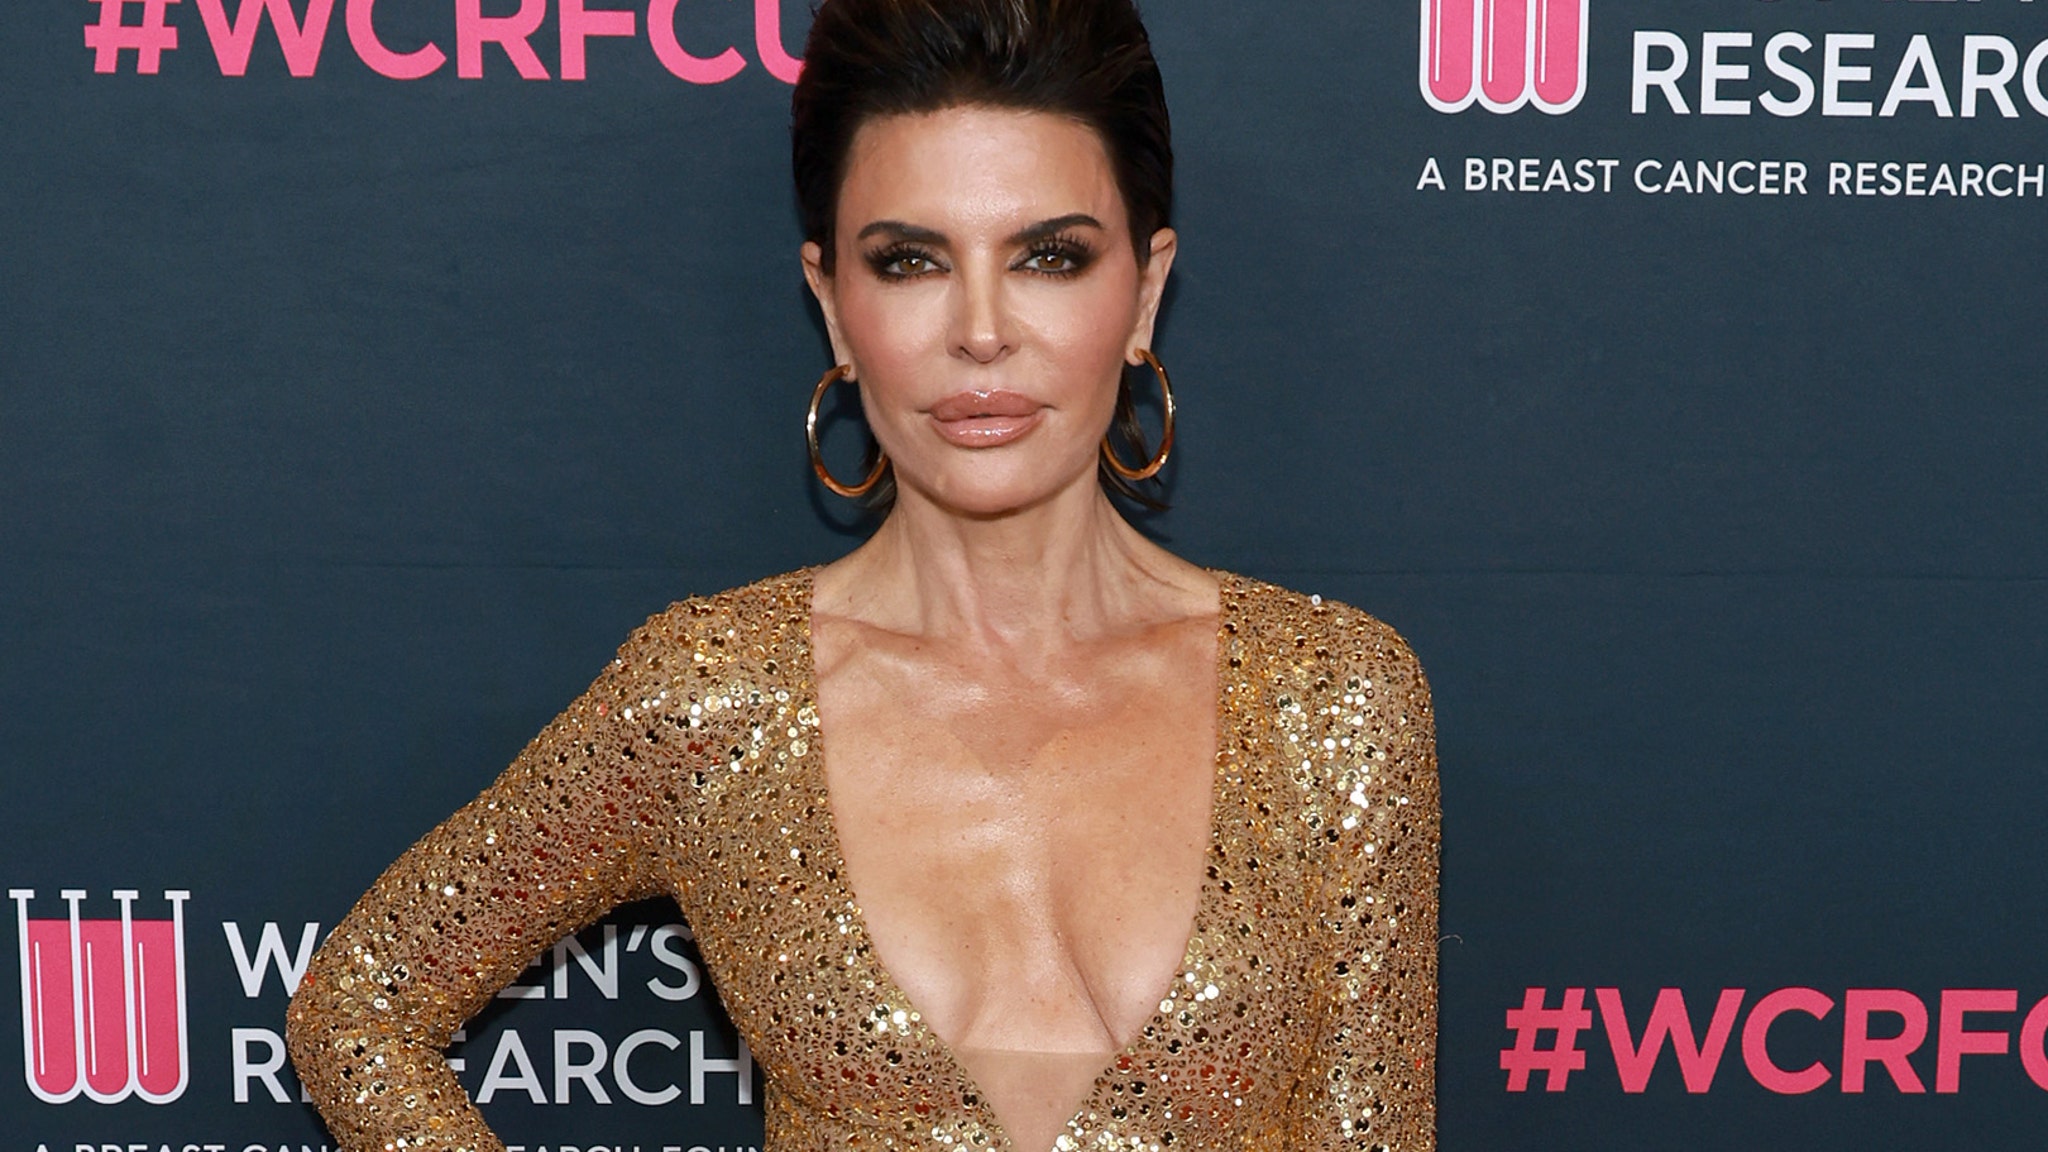 Lisa Rinna Claims She Quit RHOBH After Death Threats, Vision of Late Mom